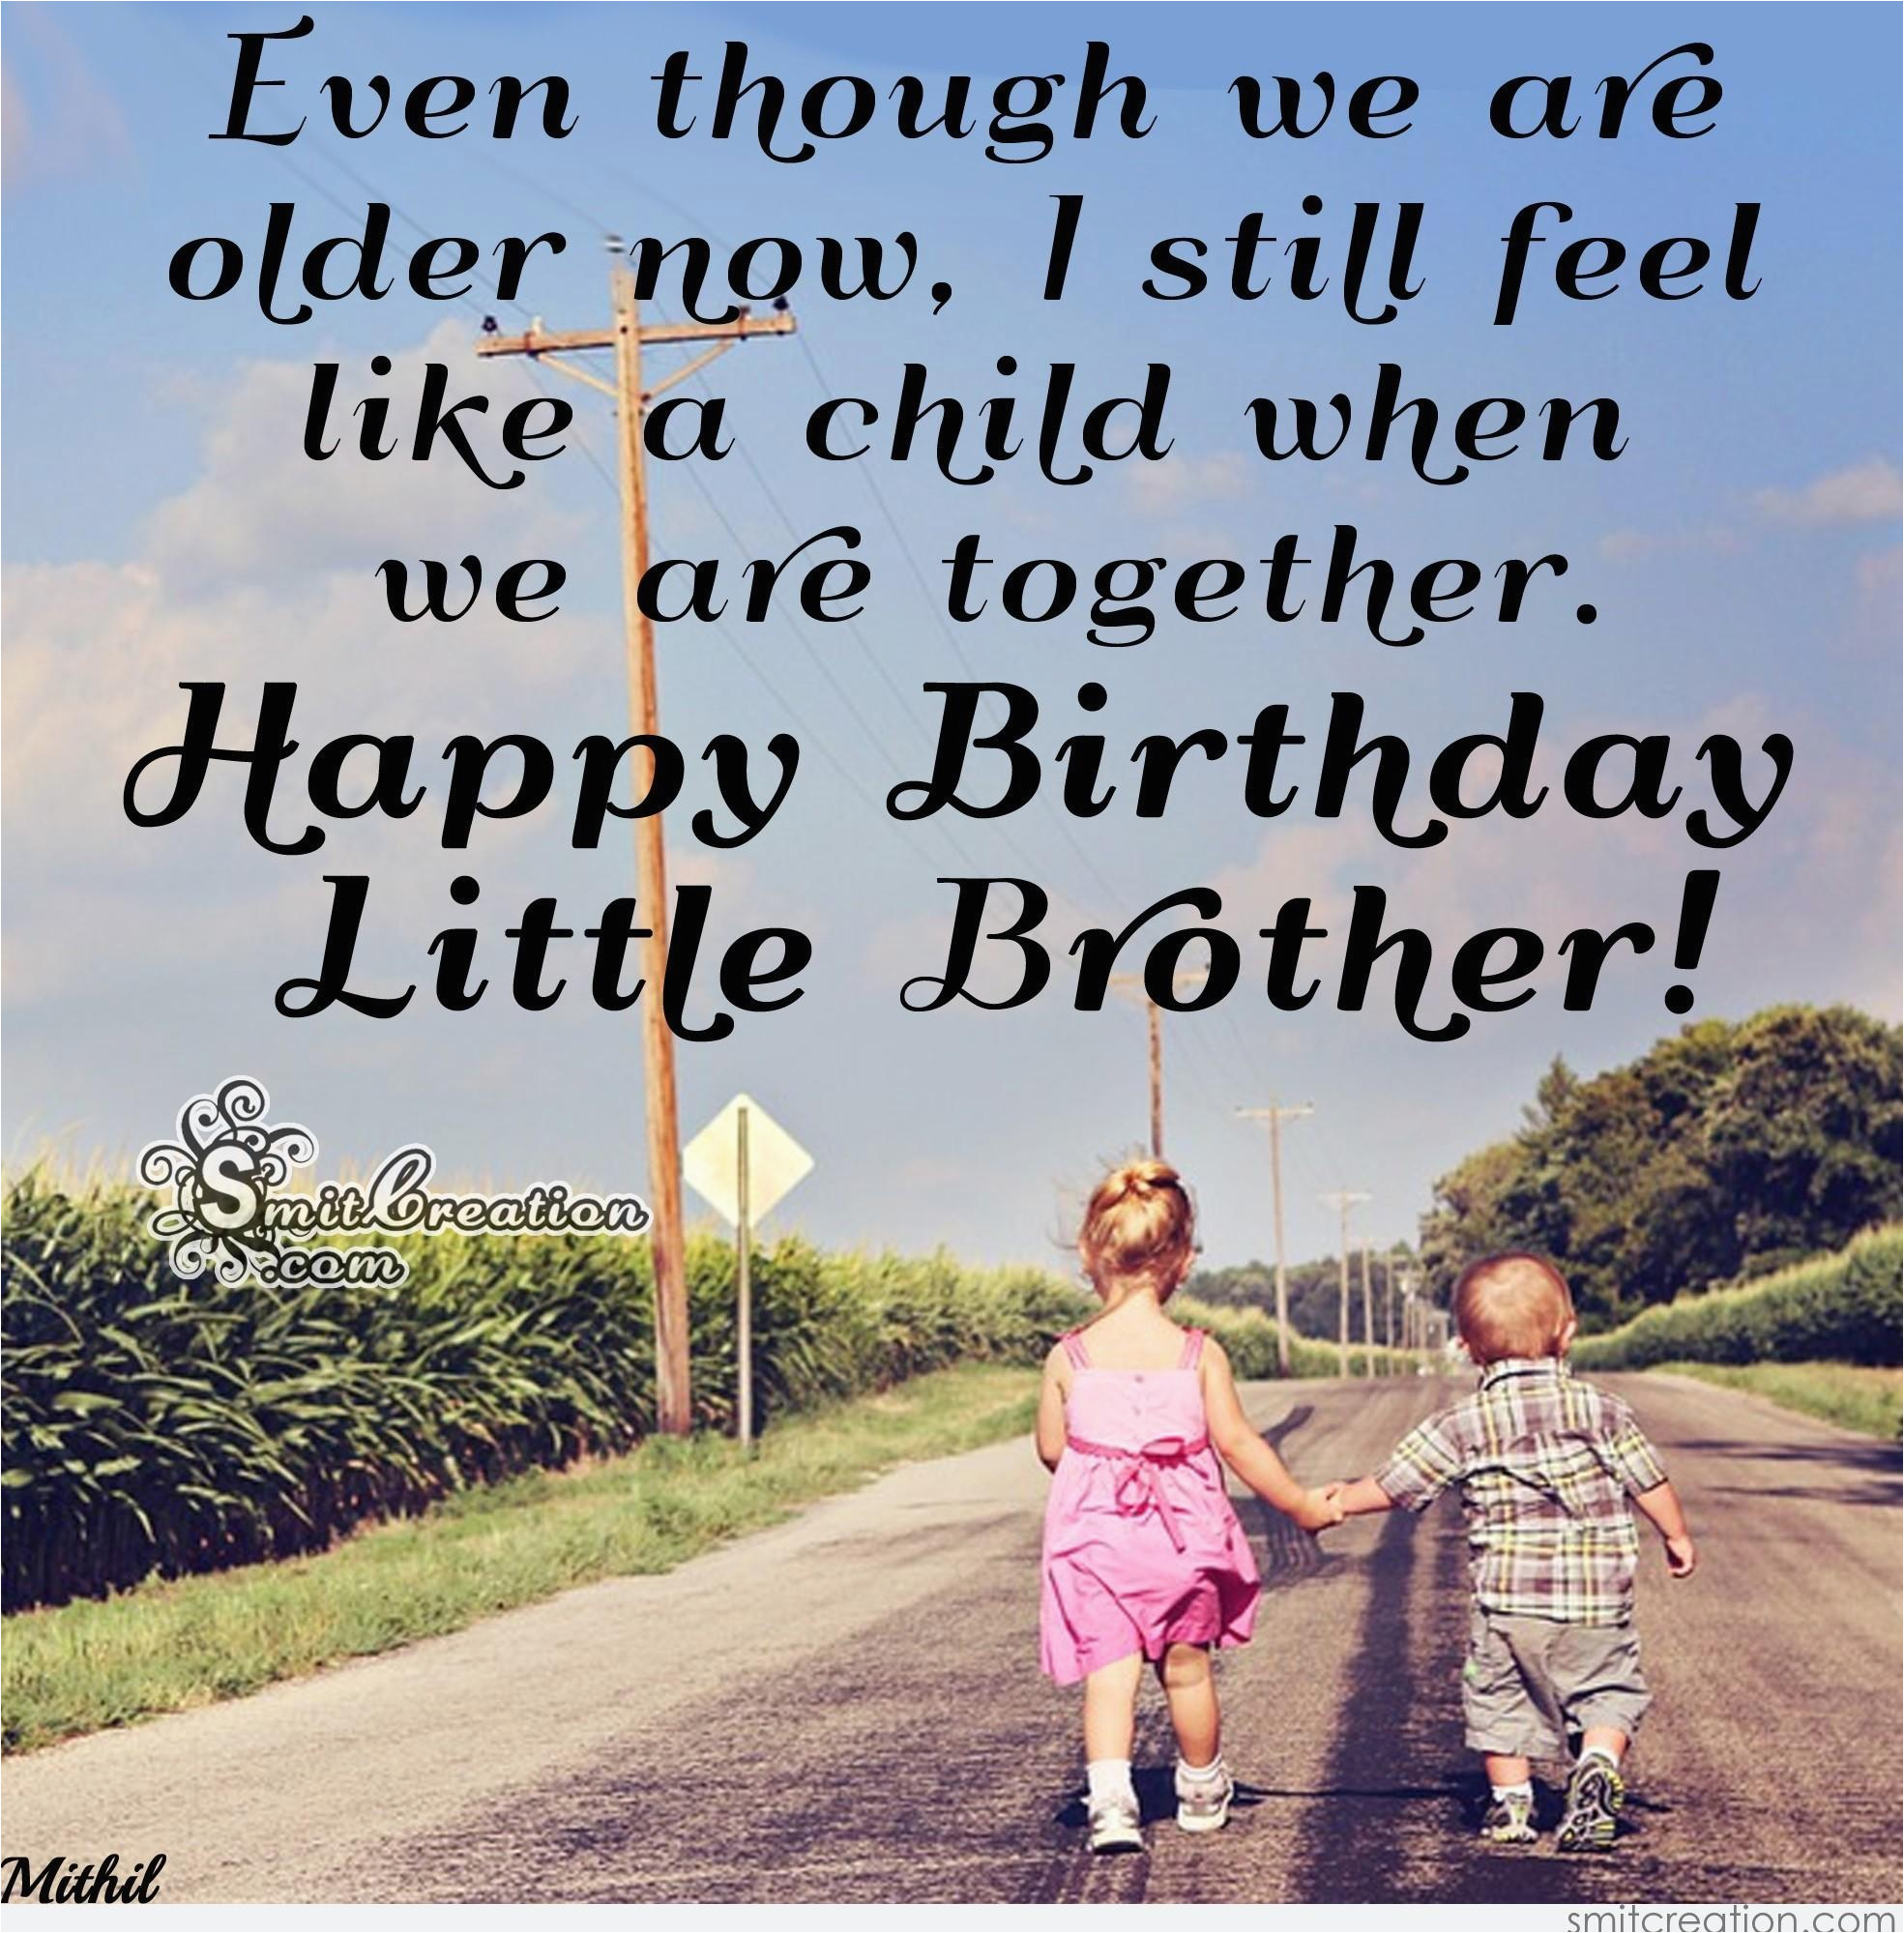 Birthday Cards for Little Brother Birthday Wishes for Brother Pictures and Graphics